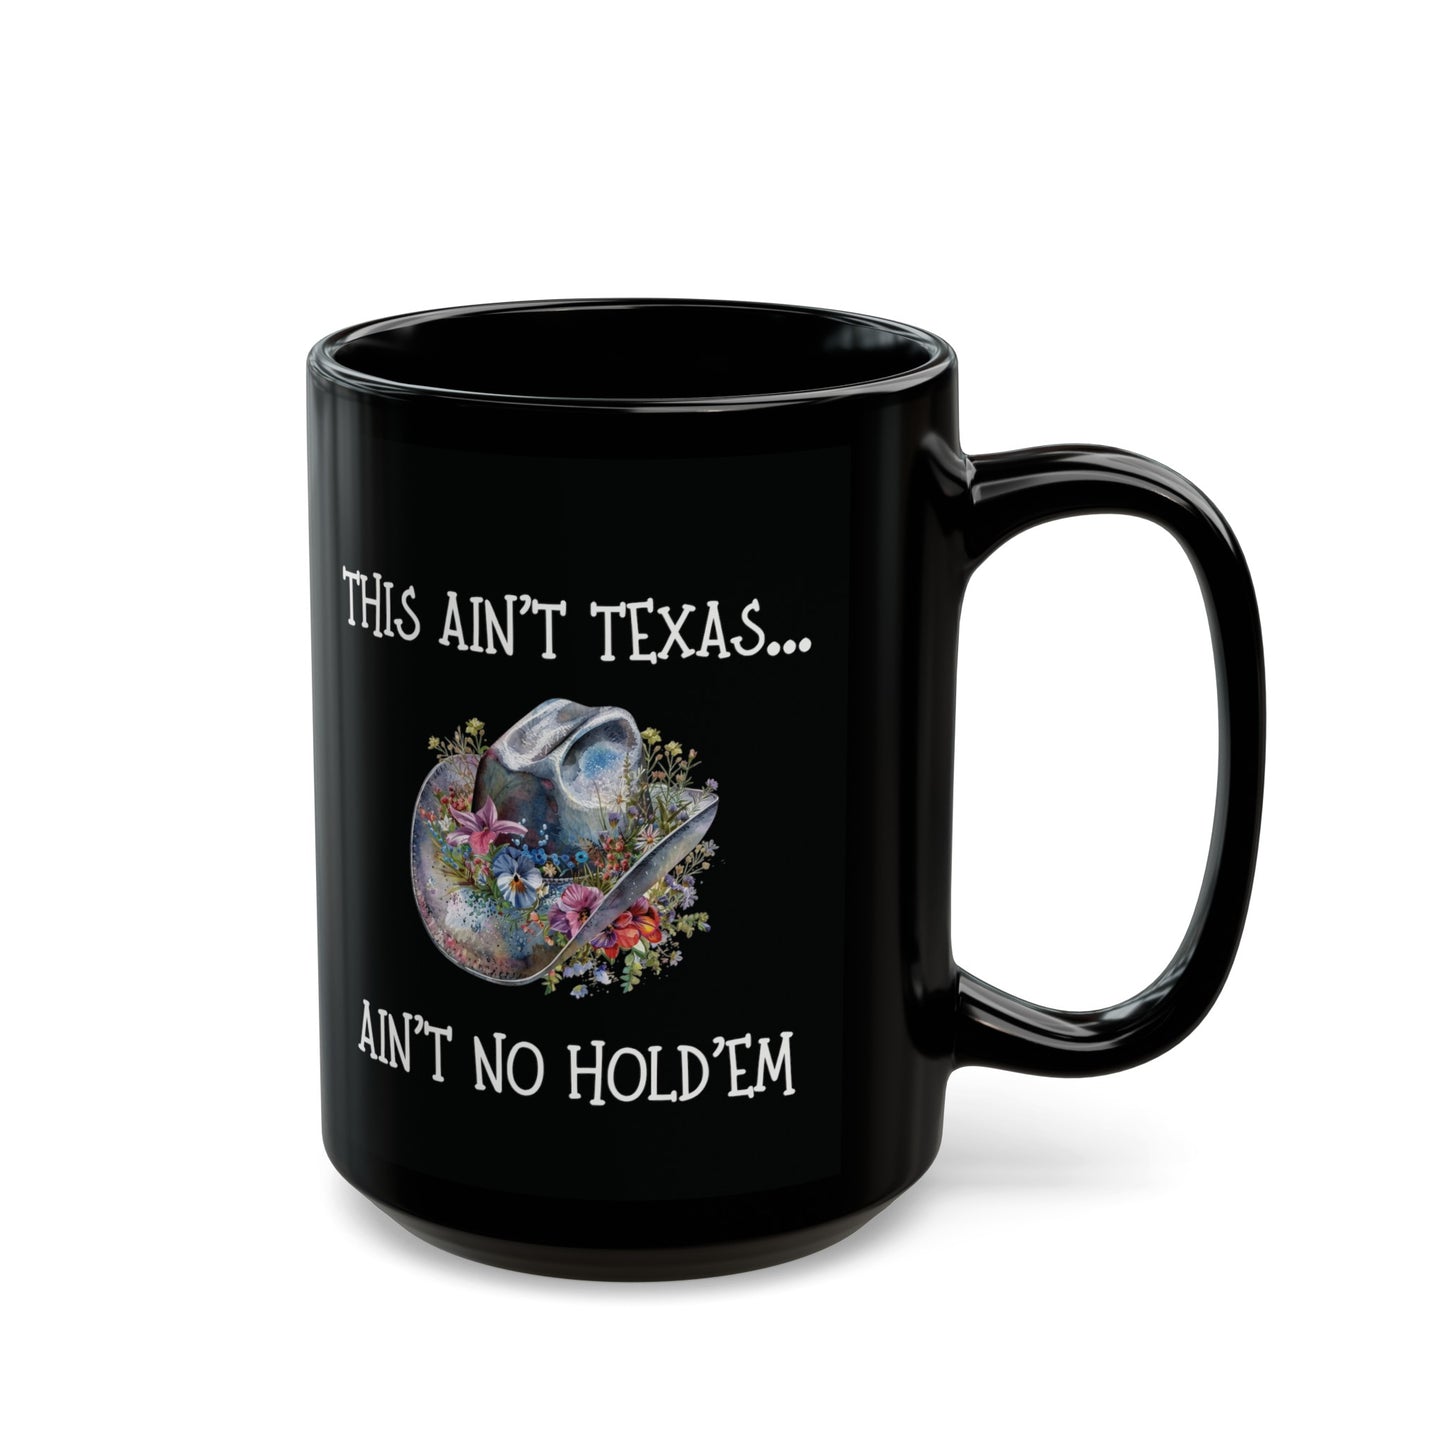 AIN'T NO HOLD'EM Graphic Black Mug (11oz, 15oz), Cowboy Carter Inspired, Urban Cowgirl Graphic, Fan Art, Cowgirl Hat Graphic, Country Mug, Western Graphic Mug, Gift for Her, Mother's Day Gift